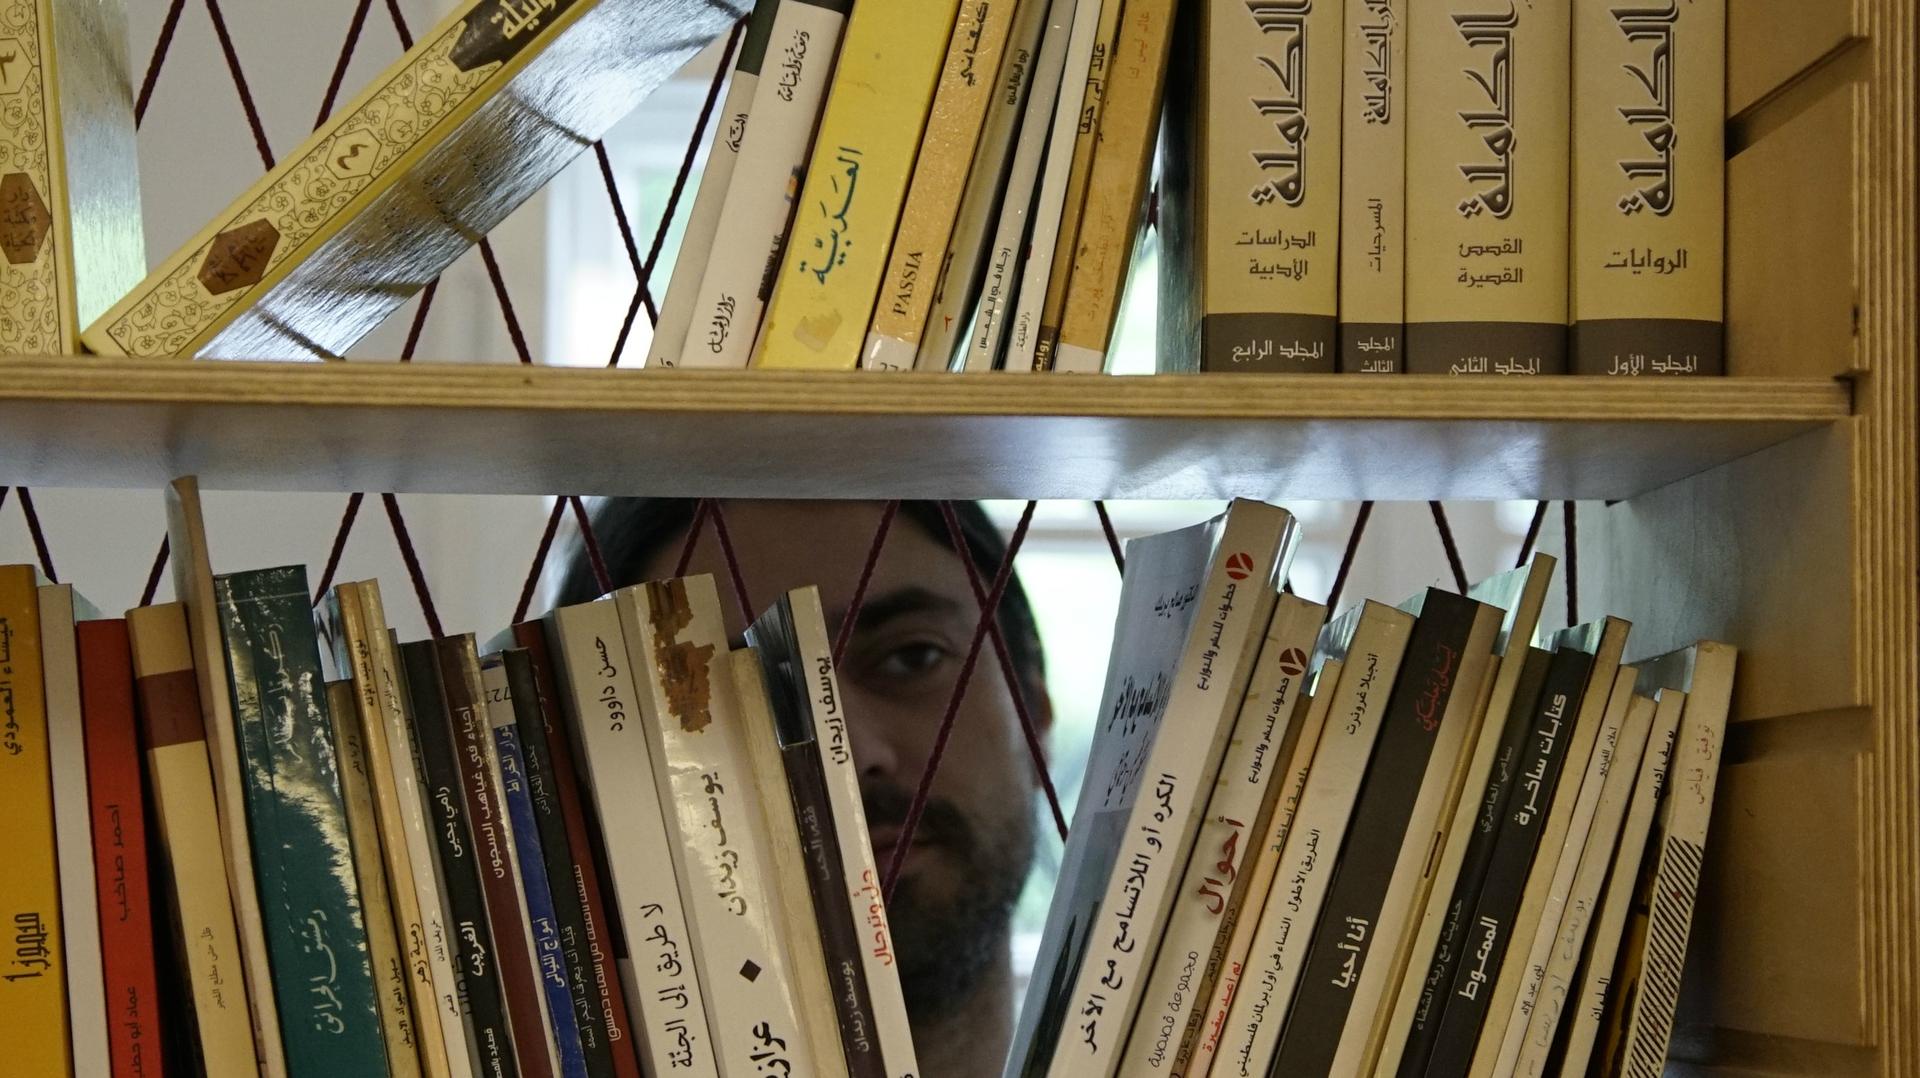 Muhanned Qaiconie, a co-founder of Berlin's first Arabic-language public library, looks at books in the collection. “All kinds of people come here,” he said. “We have older generations of Arabic speakers, new readers, seasoned bookworms, aspiring writers 